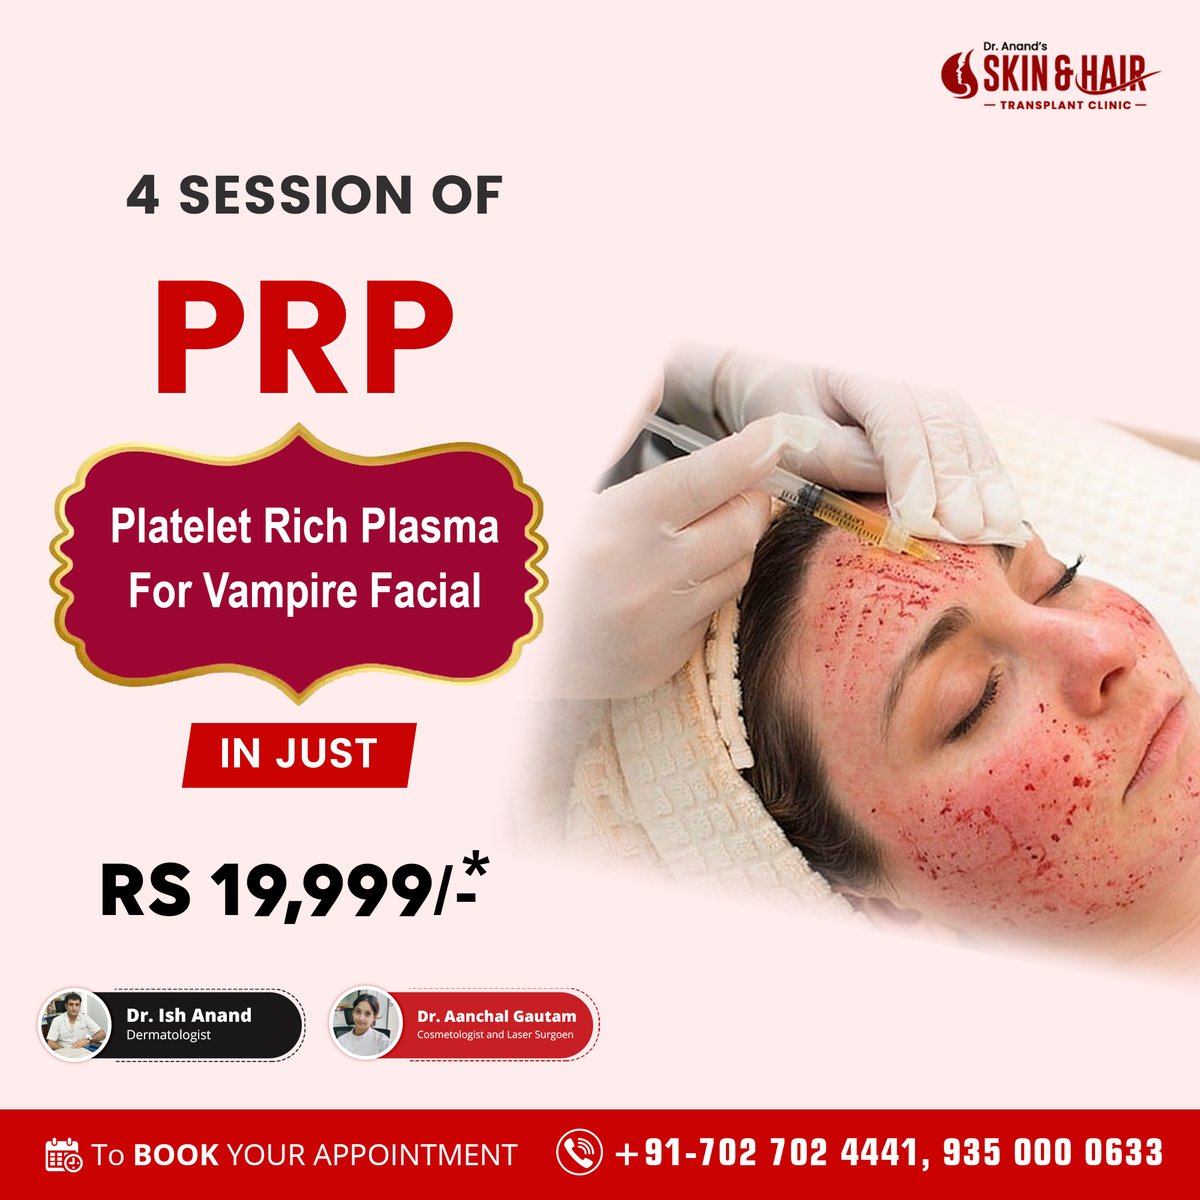 4 sessions of PRP
Platelet-rich Plasma For Vampire Facial
In Just Rs 19,999/*

Call Now For an Appointment!
+91 9350000633 | +91 7027024441

#vampirefacial #prp #skincare #aesthetics #prpfacial #facial #beauty #antiaging #dermaplaning #antiwrinkle #lipfiller #glowingskin